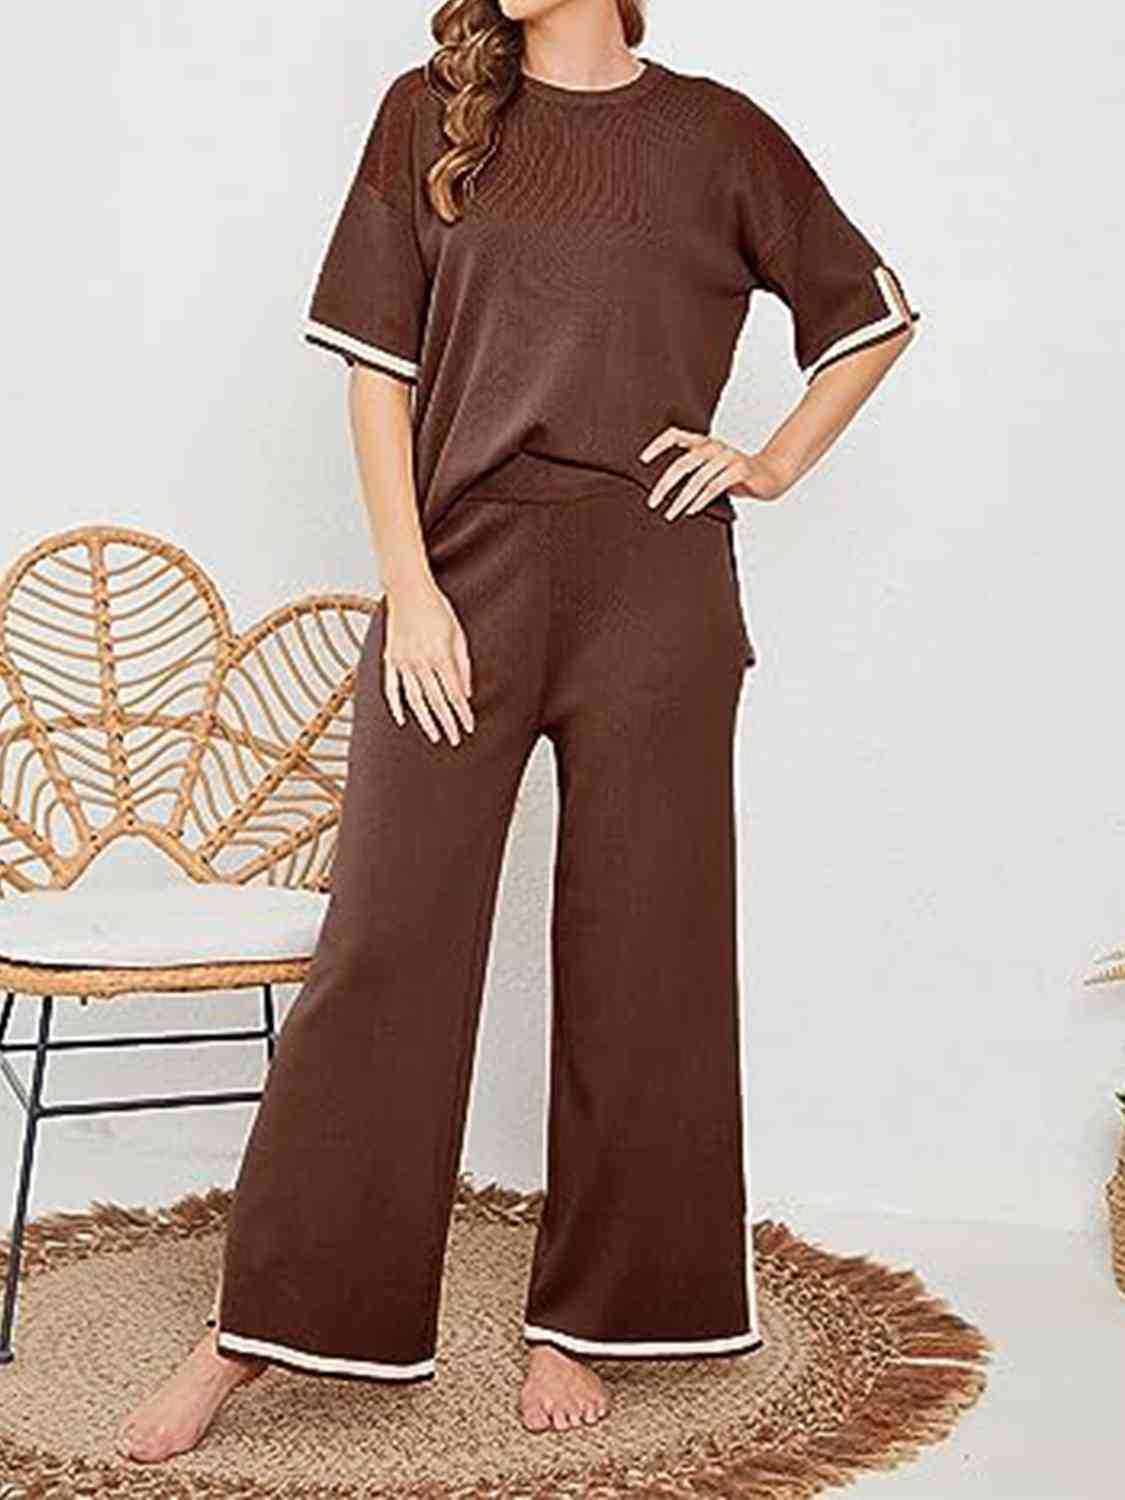 Women's Contrast High-Low Sweater and Knit Pants Set Chestnut